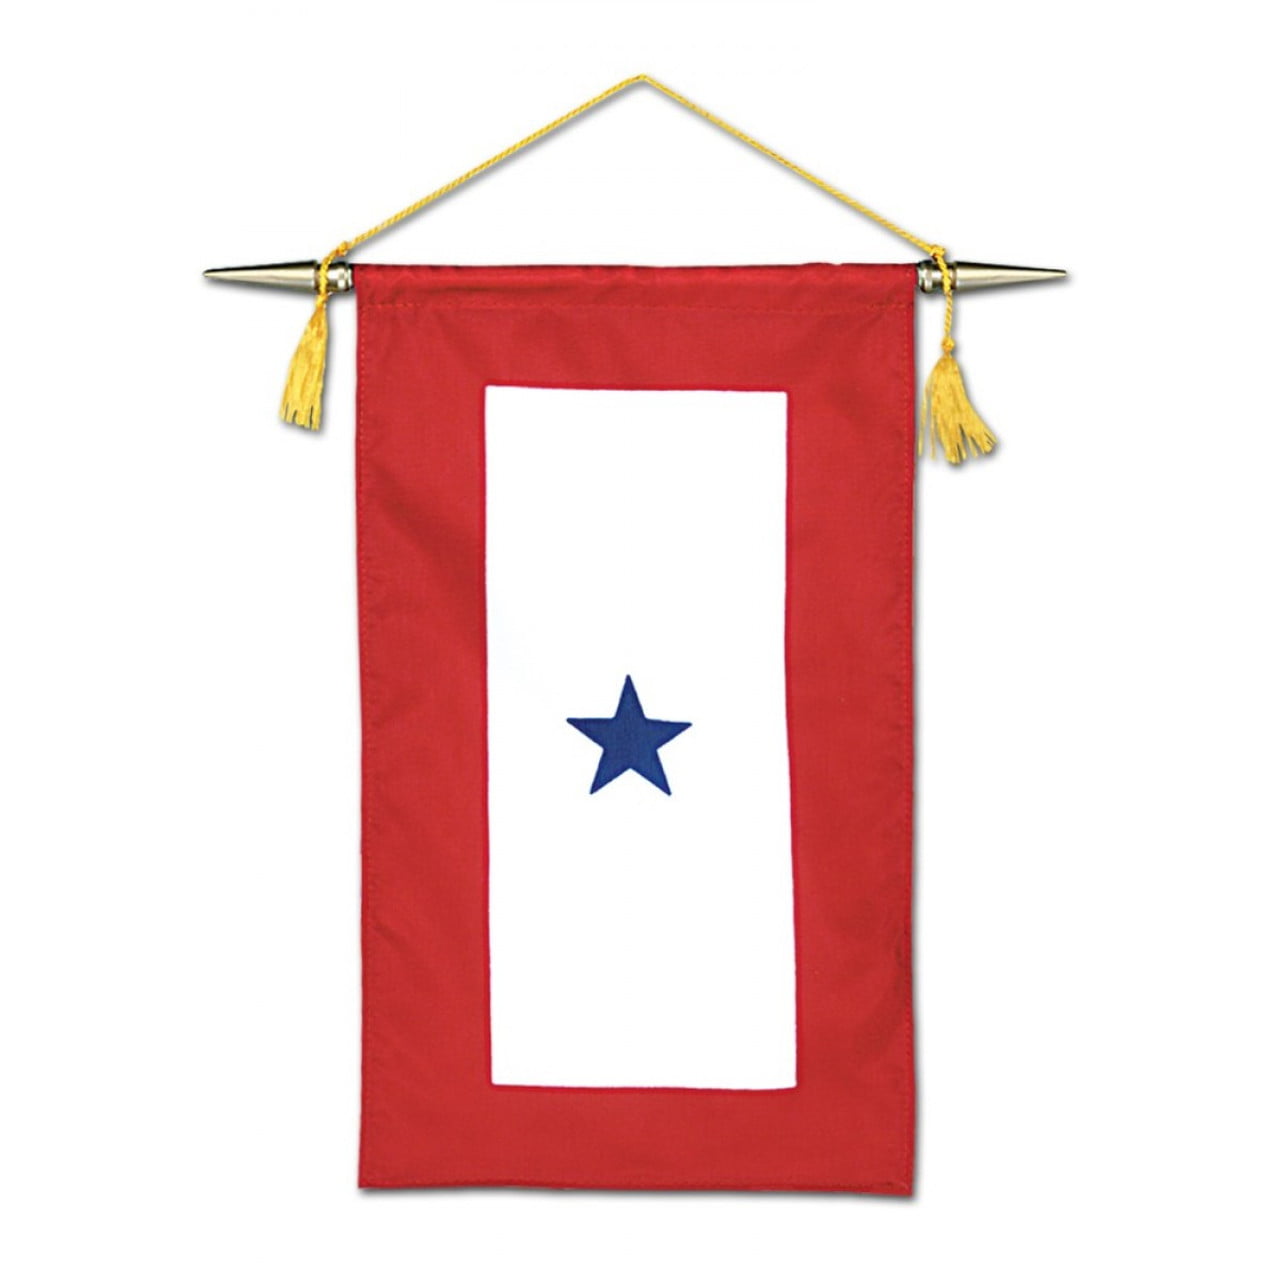 Blue Star Service Banner Flag - 8"x14" - For Indoor Use